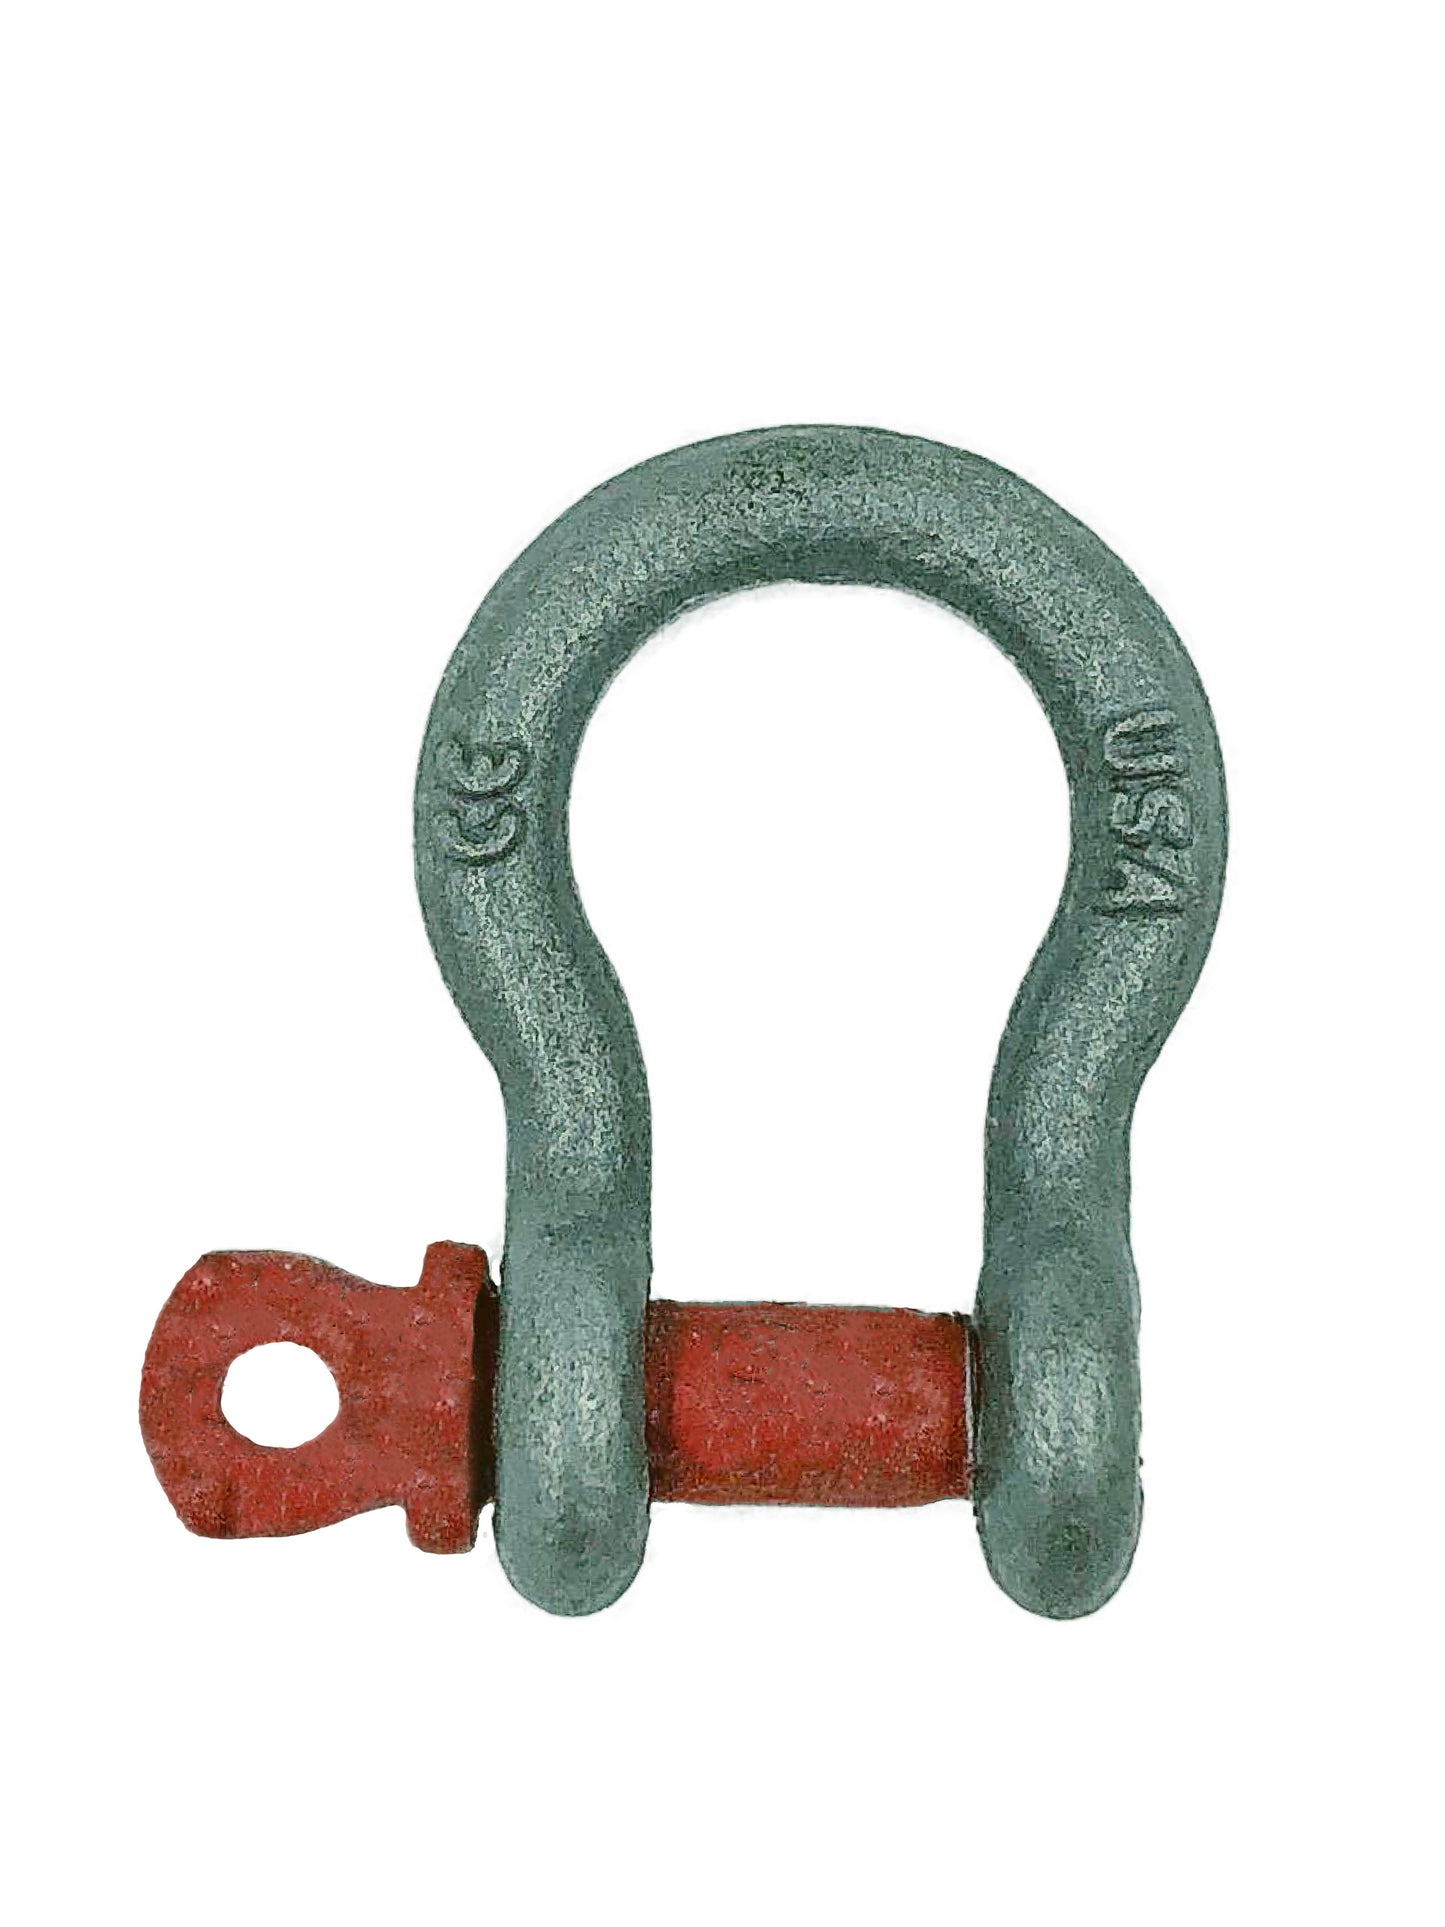 Galvanized Screw Pin Anchor Shackles Up To 1 Ton WLL